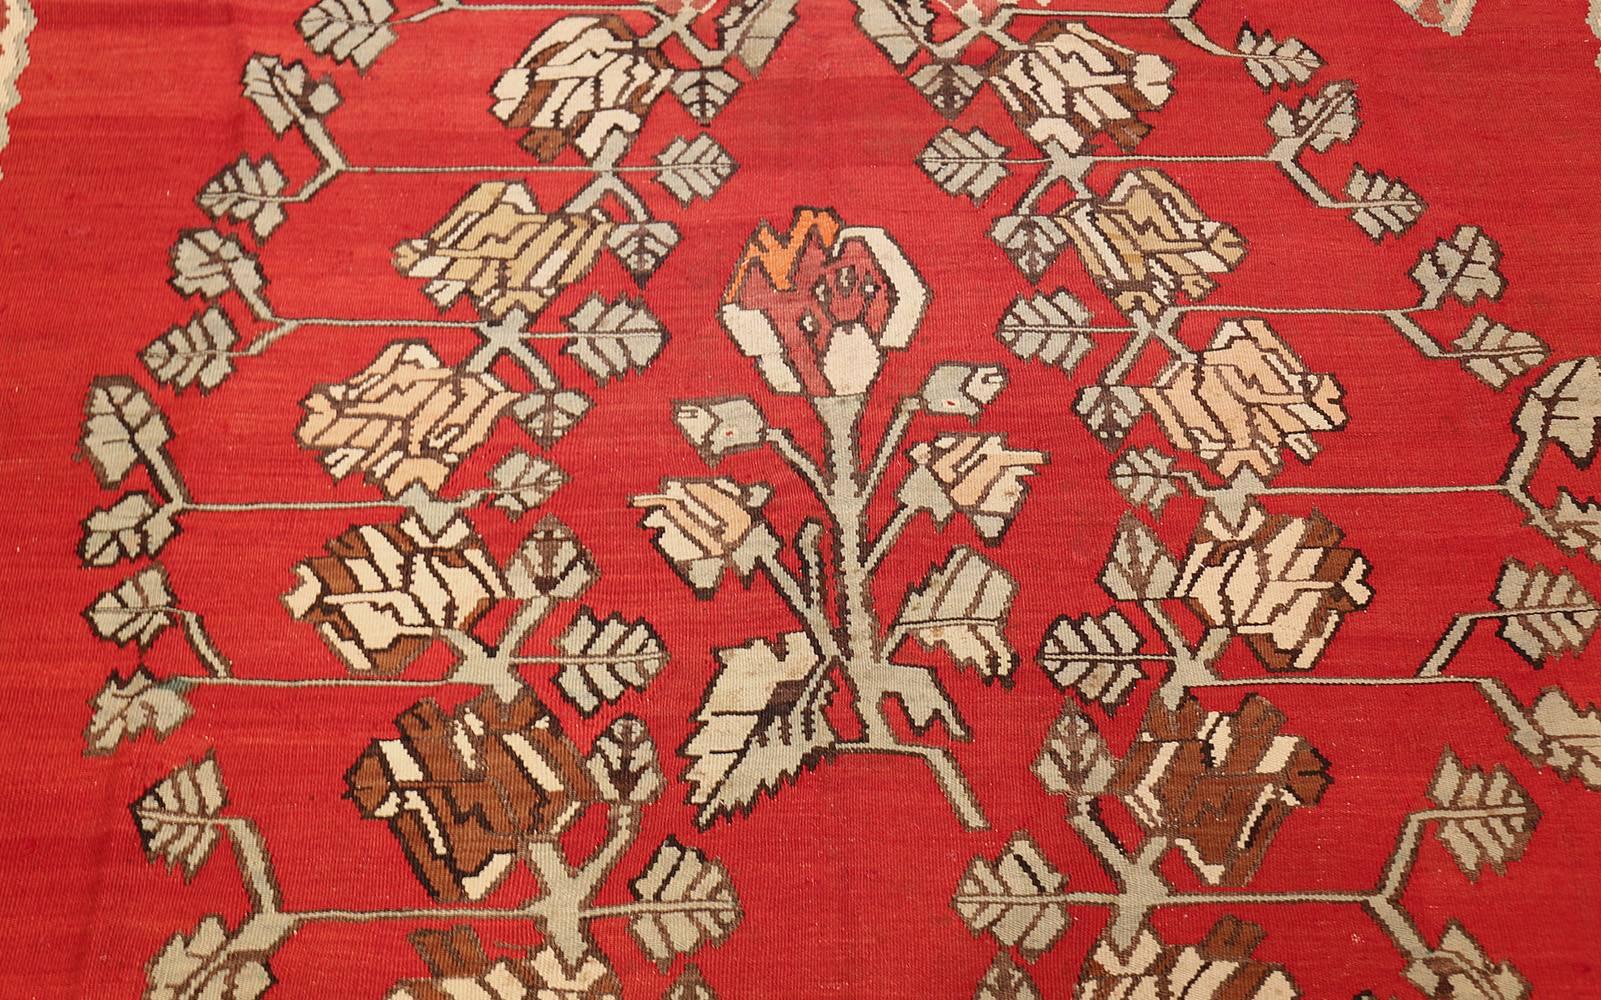 Beautiful Floral Vintage Mid Century Turkish Kilim Rug, Country of Origin / Rug Type: Turkish Rug, Circa Date: 1940's. Size: 8 ft x 9 ft 3 in (2.44 m x 2.82 m)

This vintage Turkish rug features an angular design depicting a wide spread of flowers